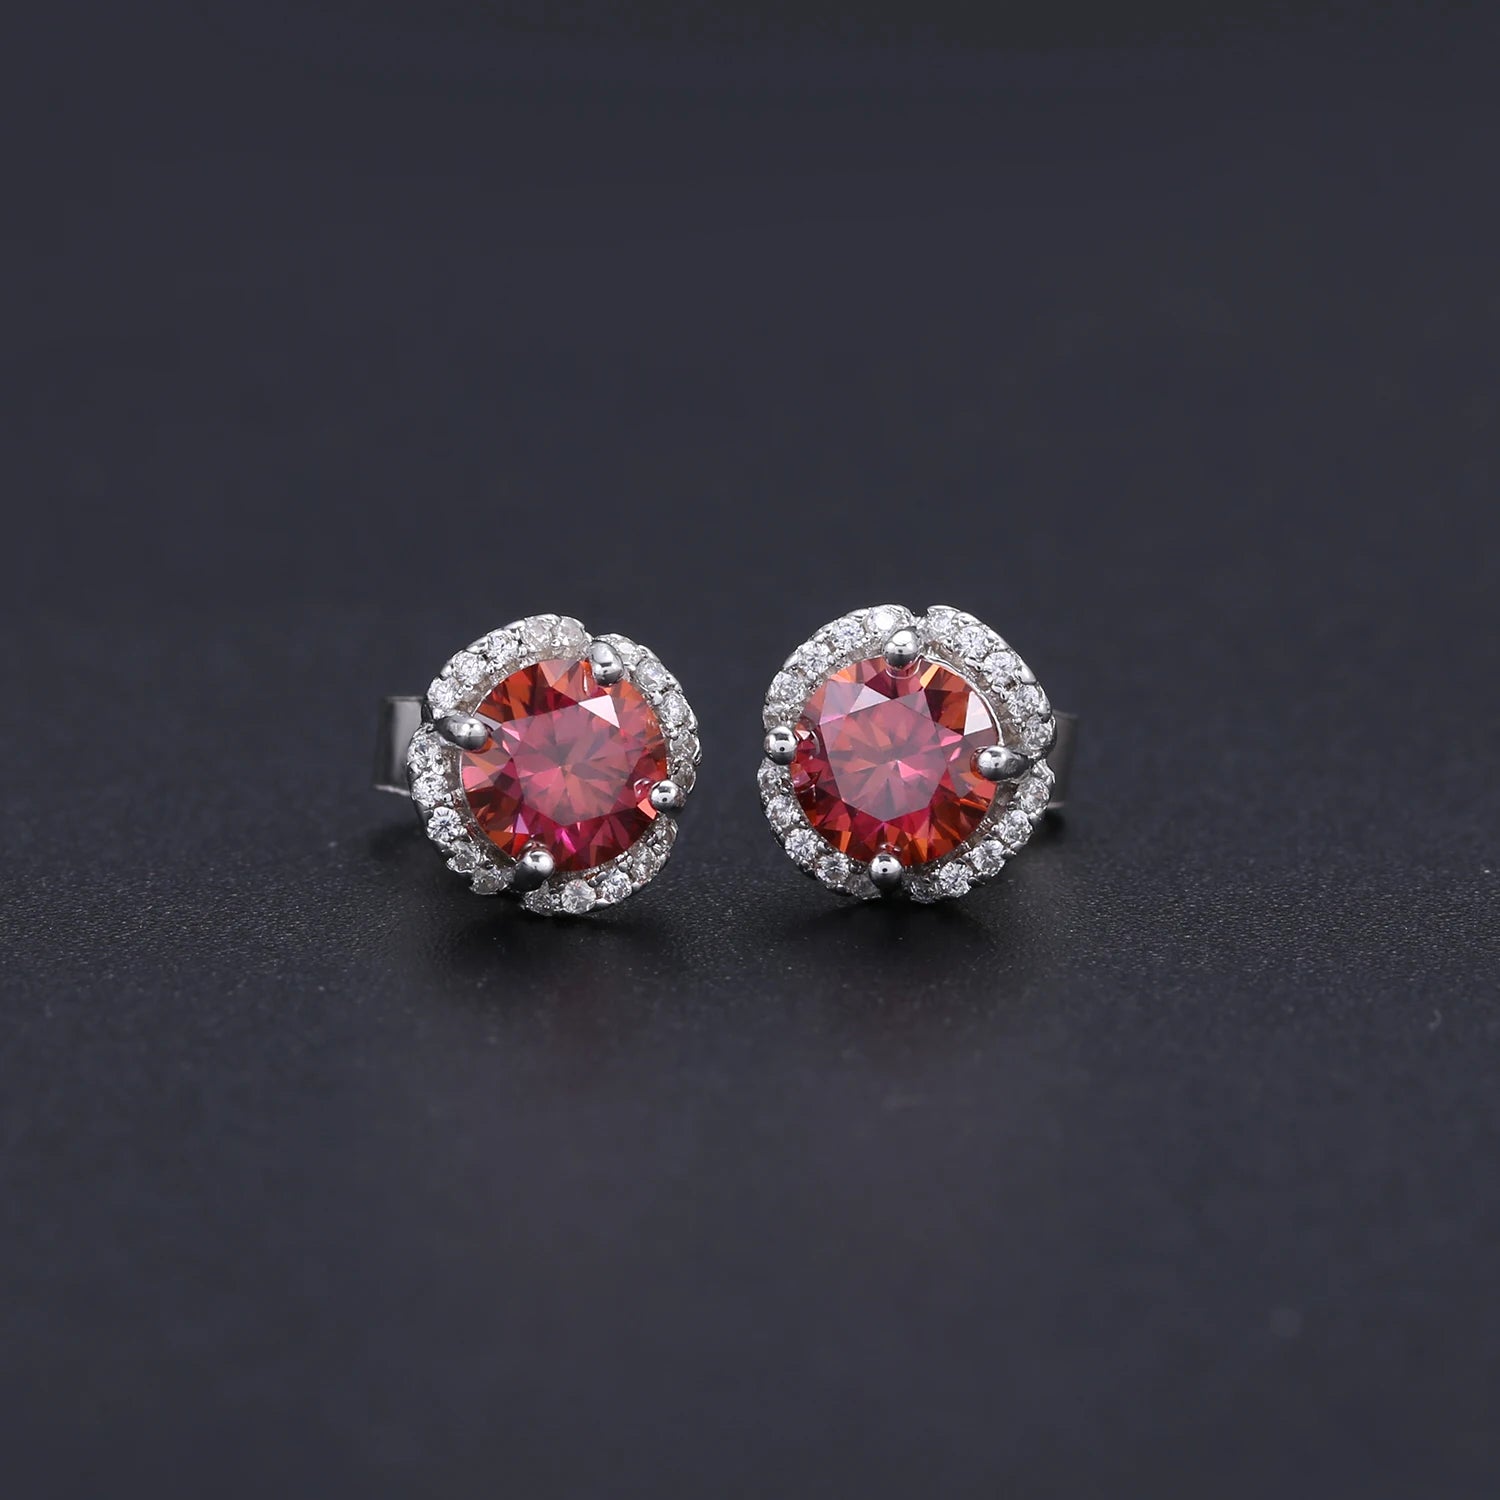 GEM'S BALLET Pink Moissanite 0.5TW 5mm Round Cut Moissanite Halo Stud Earrings in 925 Sterling Silver Wedding Earrings Orange Moissanite 925 Sterling Silver CHINA